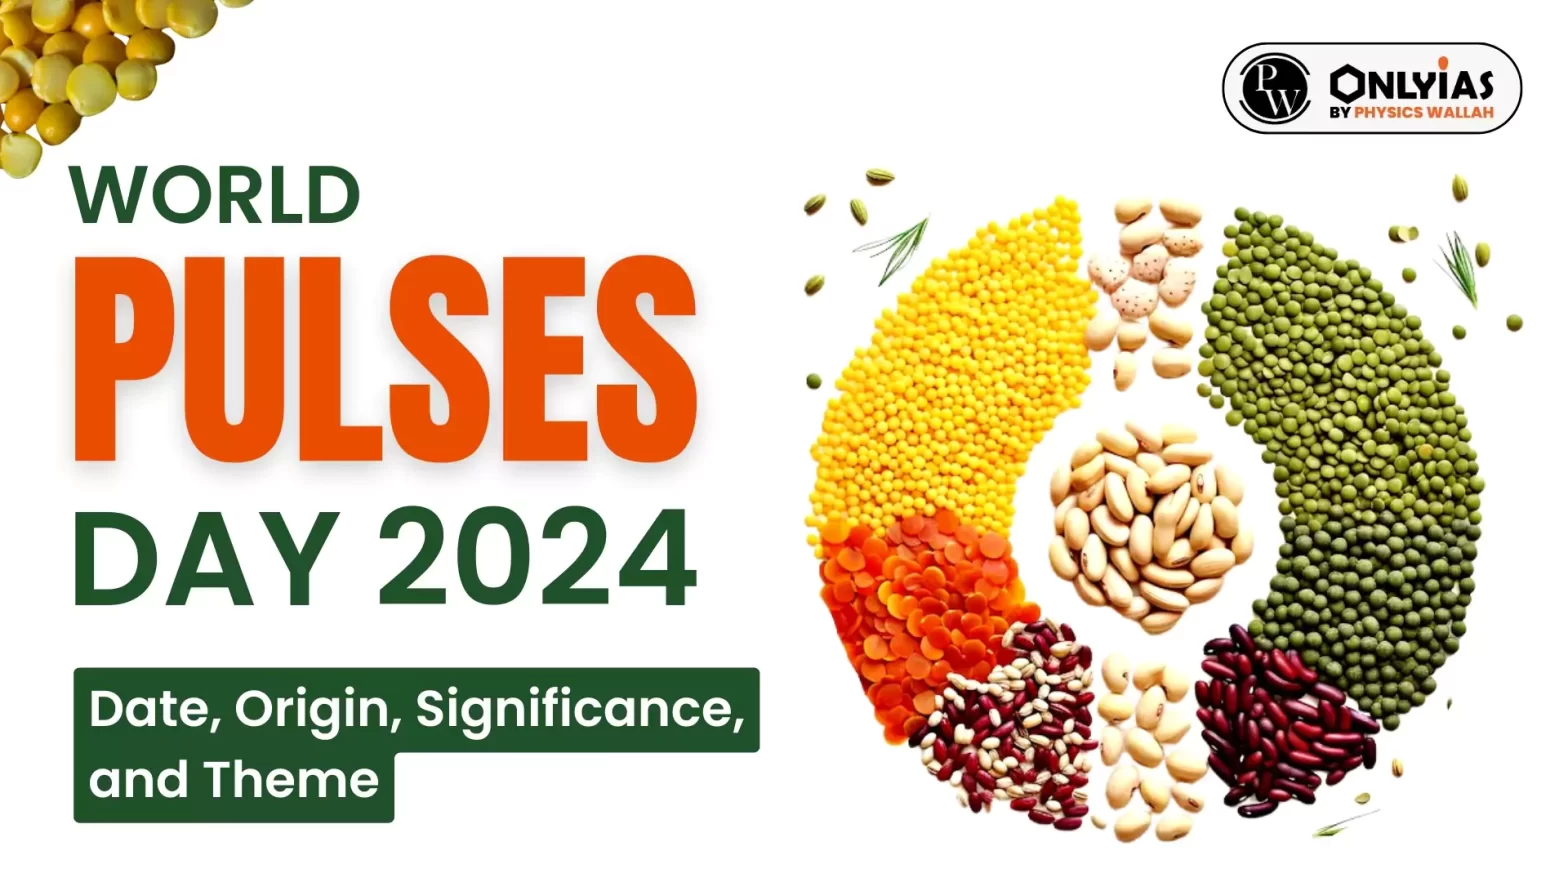 World Pulses Day 2024: Date, Origin, Significance, and Theme